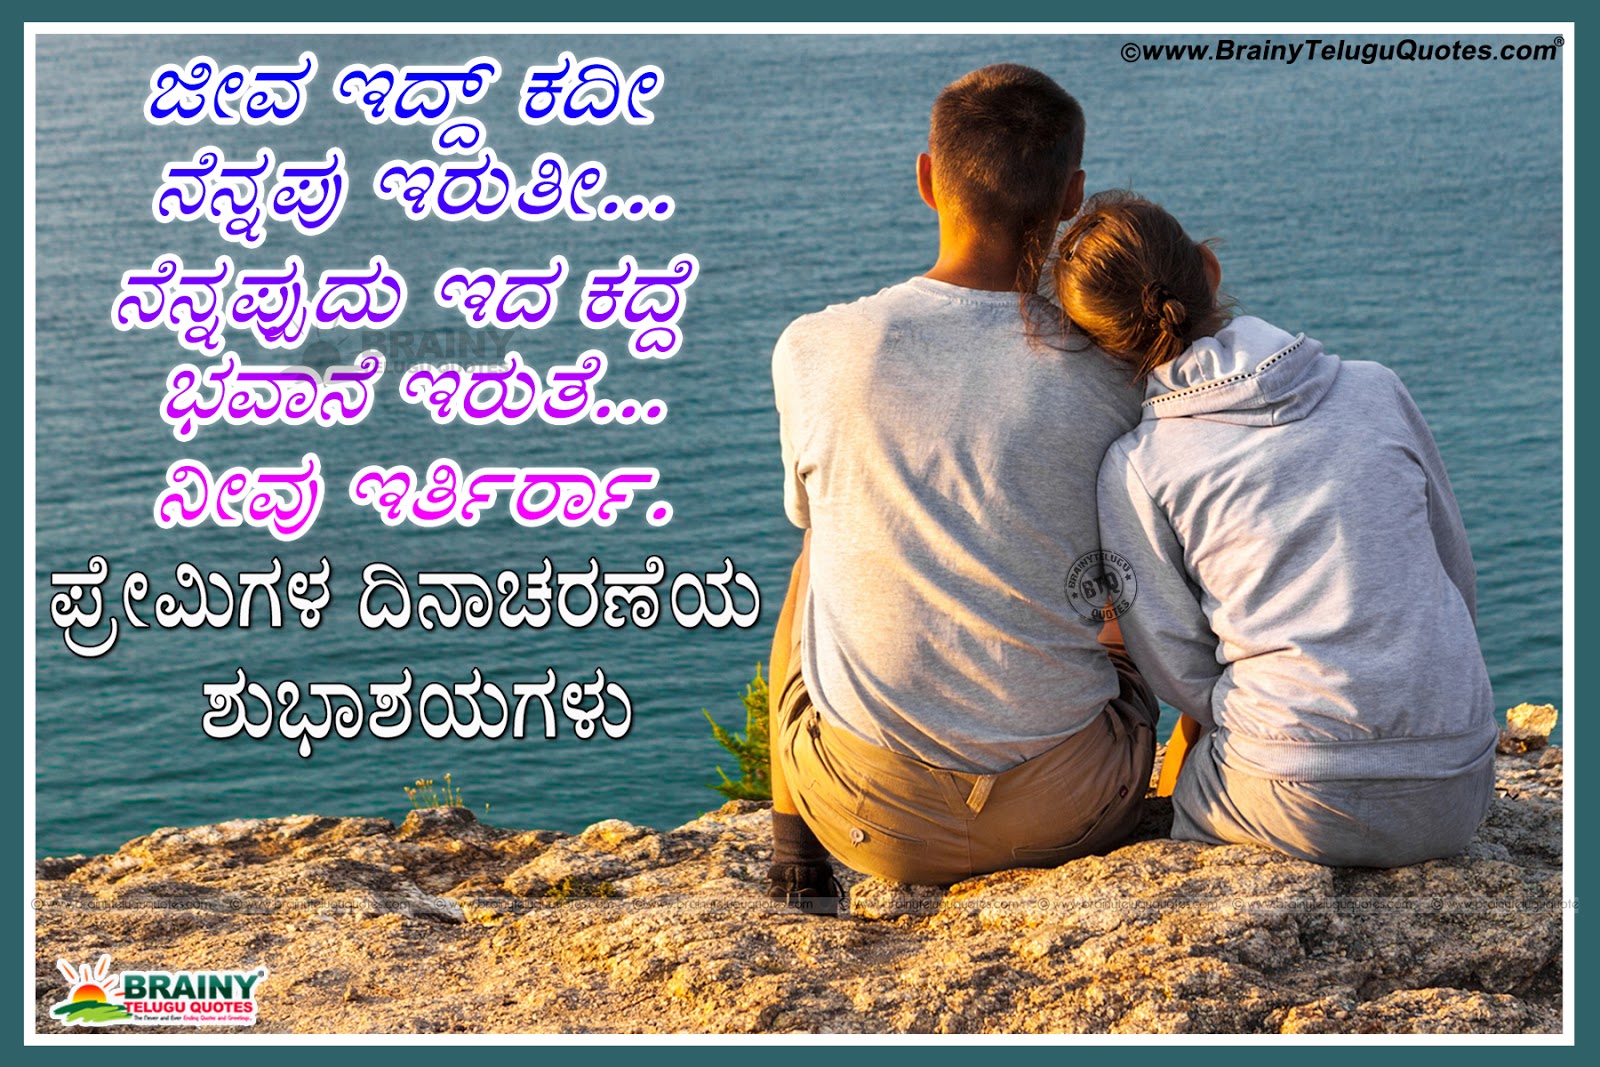 Kannada valentines day preethiya kavithegalu Quotations Images with